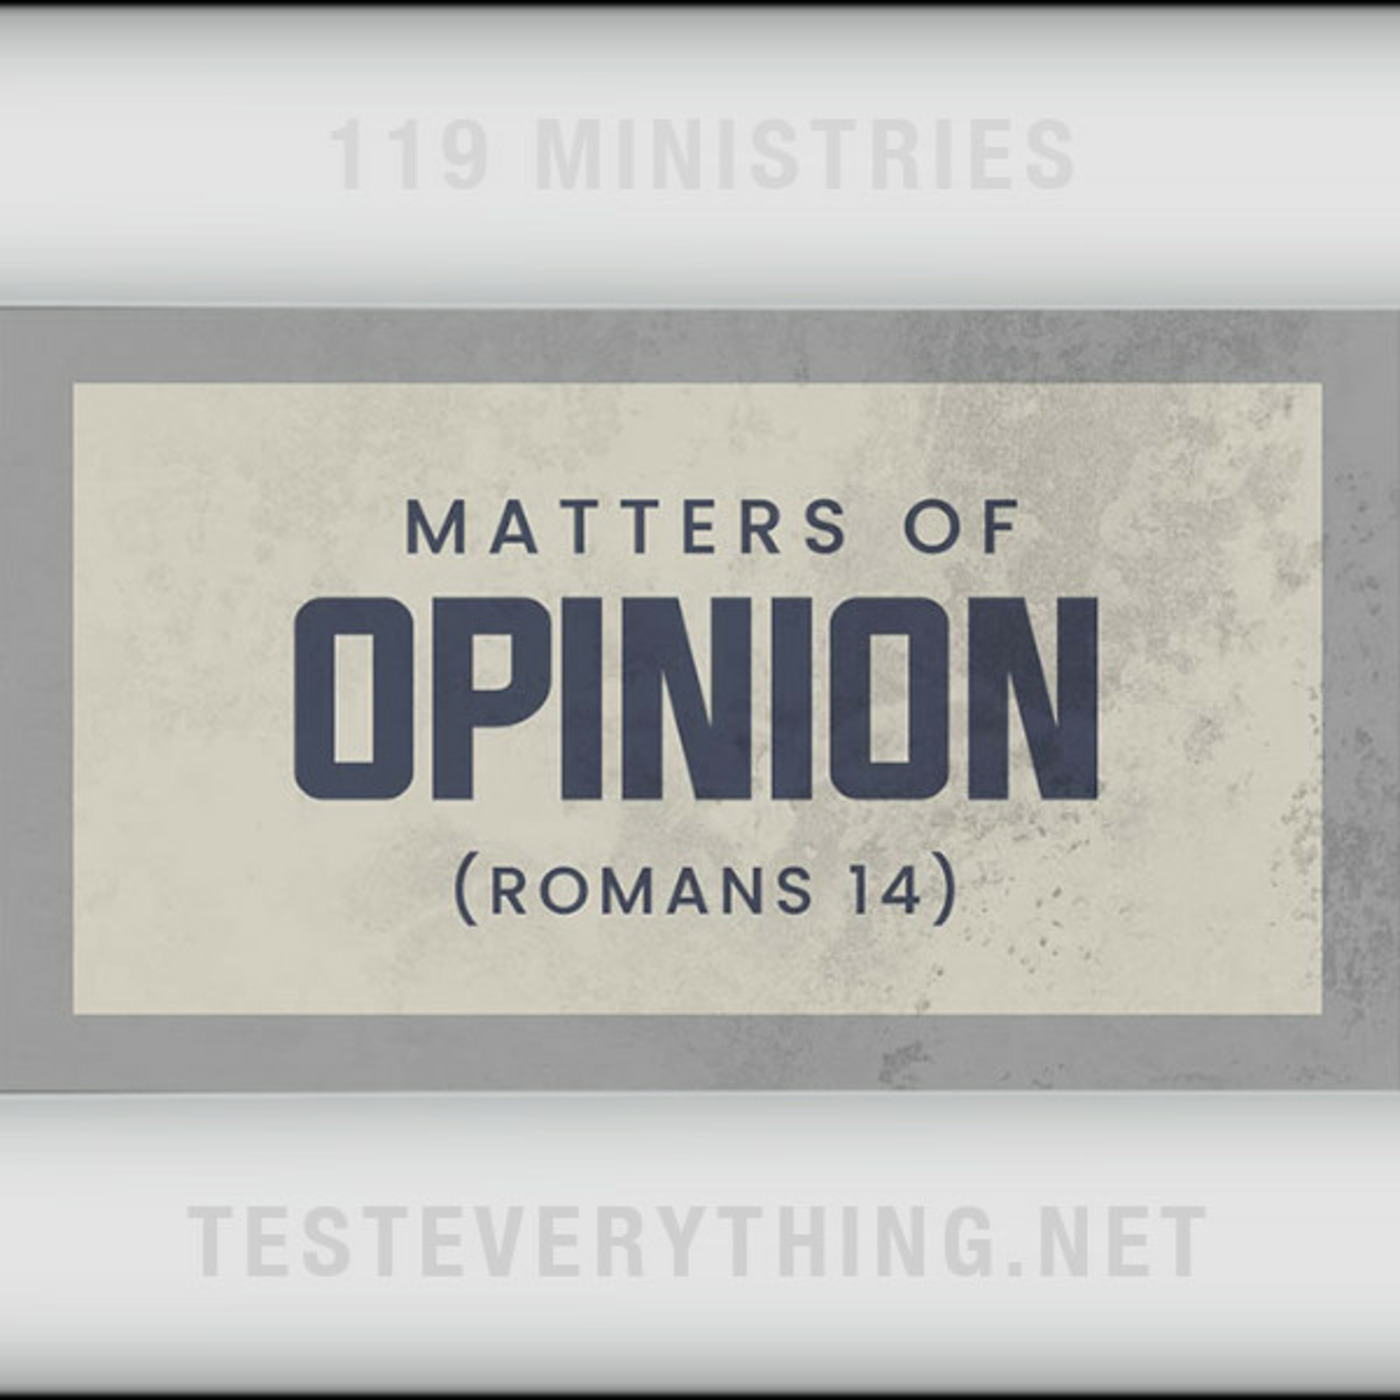 Episode 539: TE: Matters of Opinion (Romans 14)